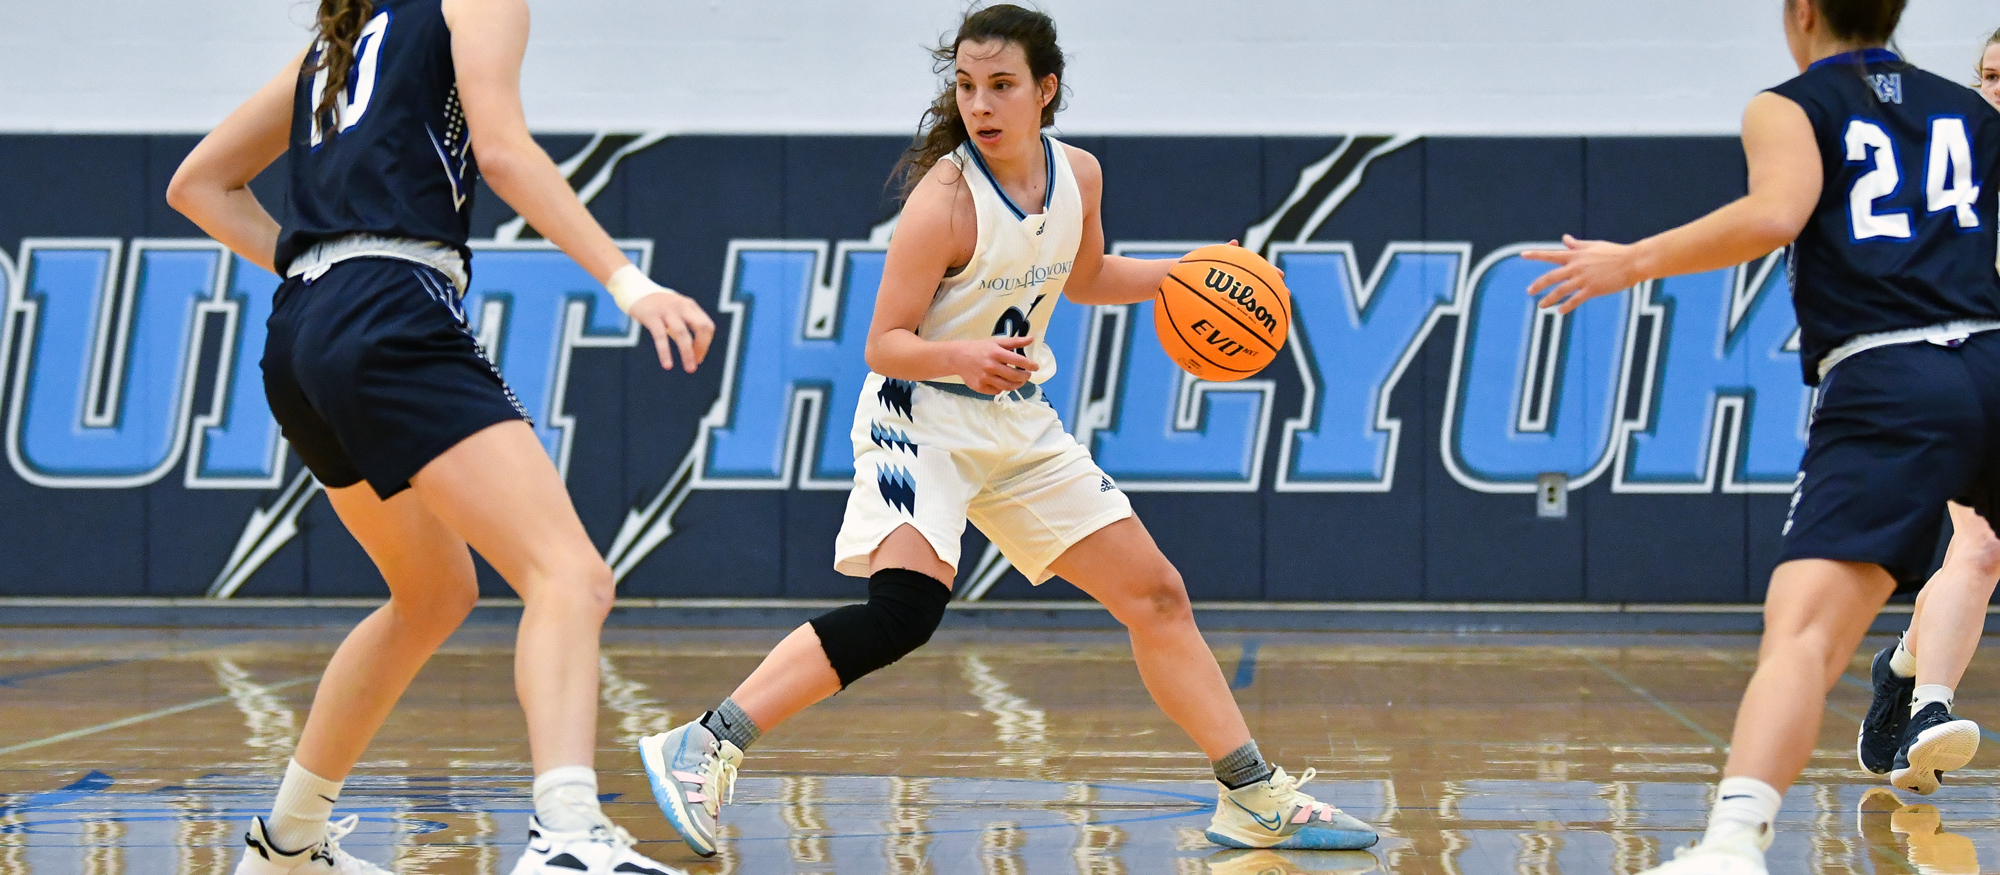 Alex Twomey returned to action after a seven-game absence, scoring four points and adding five rebounds in Mount Holyoke's loss at Clark on Feb. 4, 2023. (RJB Sports file photo)